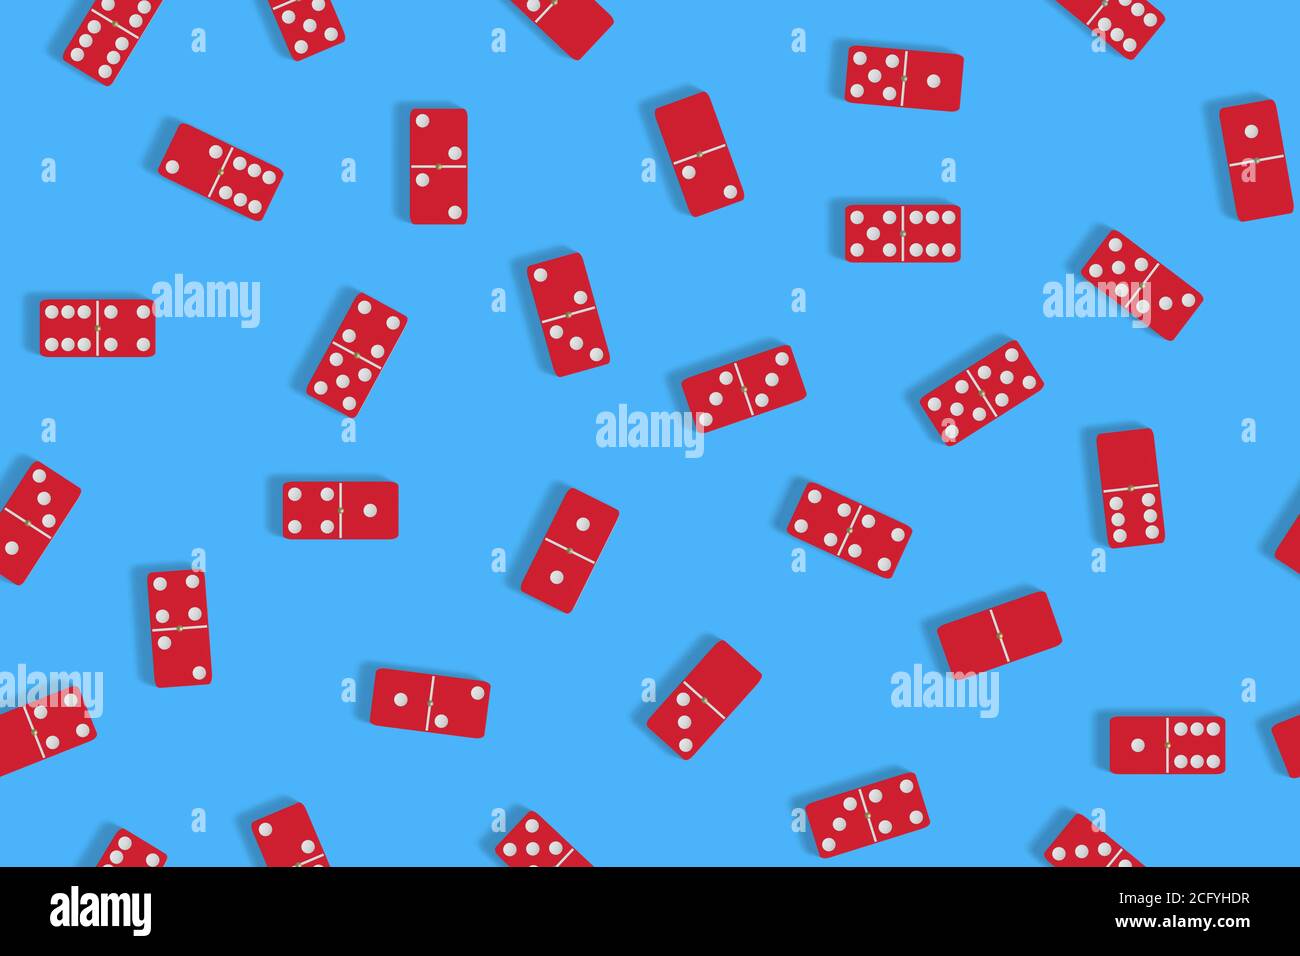 Red domino tiles on a blue background. Seamless pattern. 3d illustration. Stock Photo